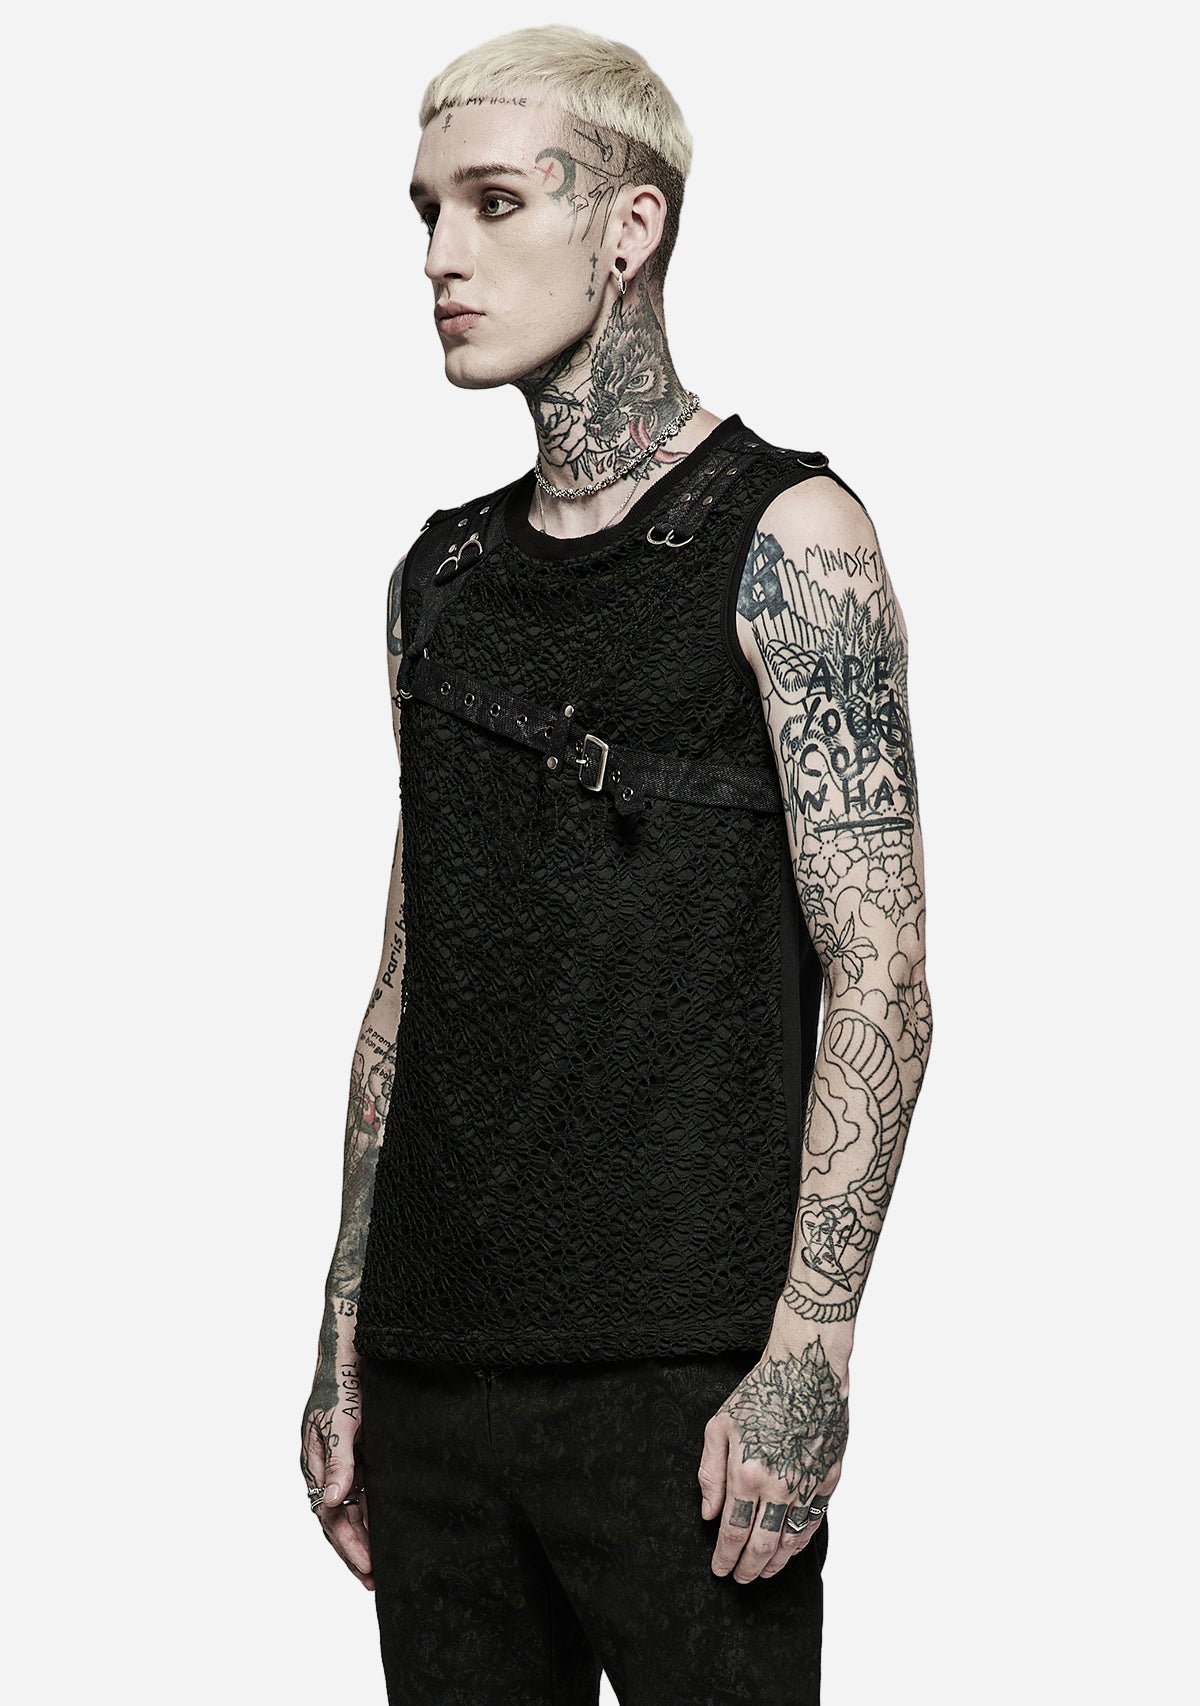 Gothic Mesh Splice Personality Tank Top